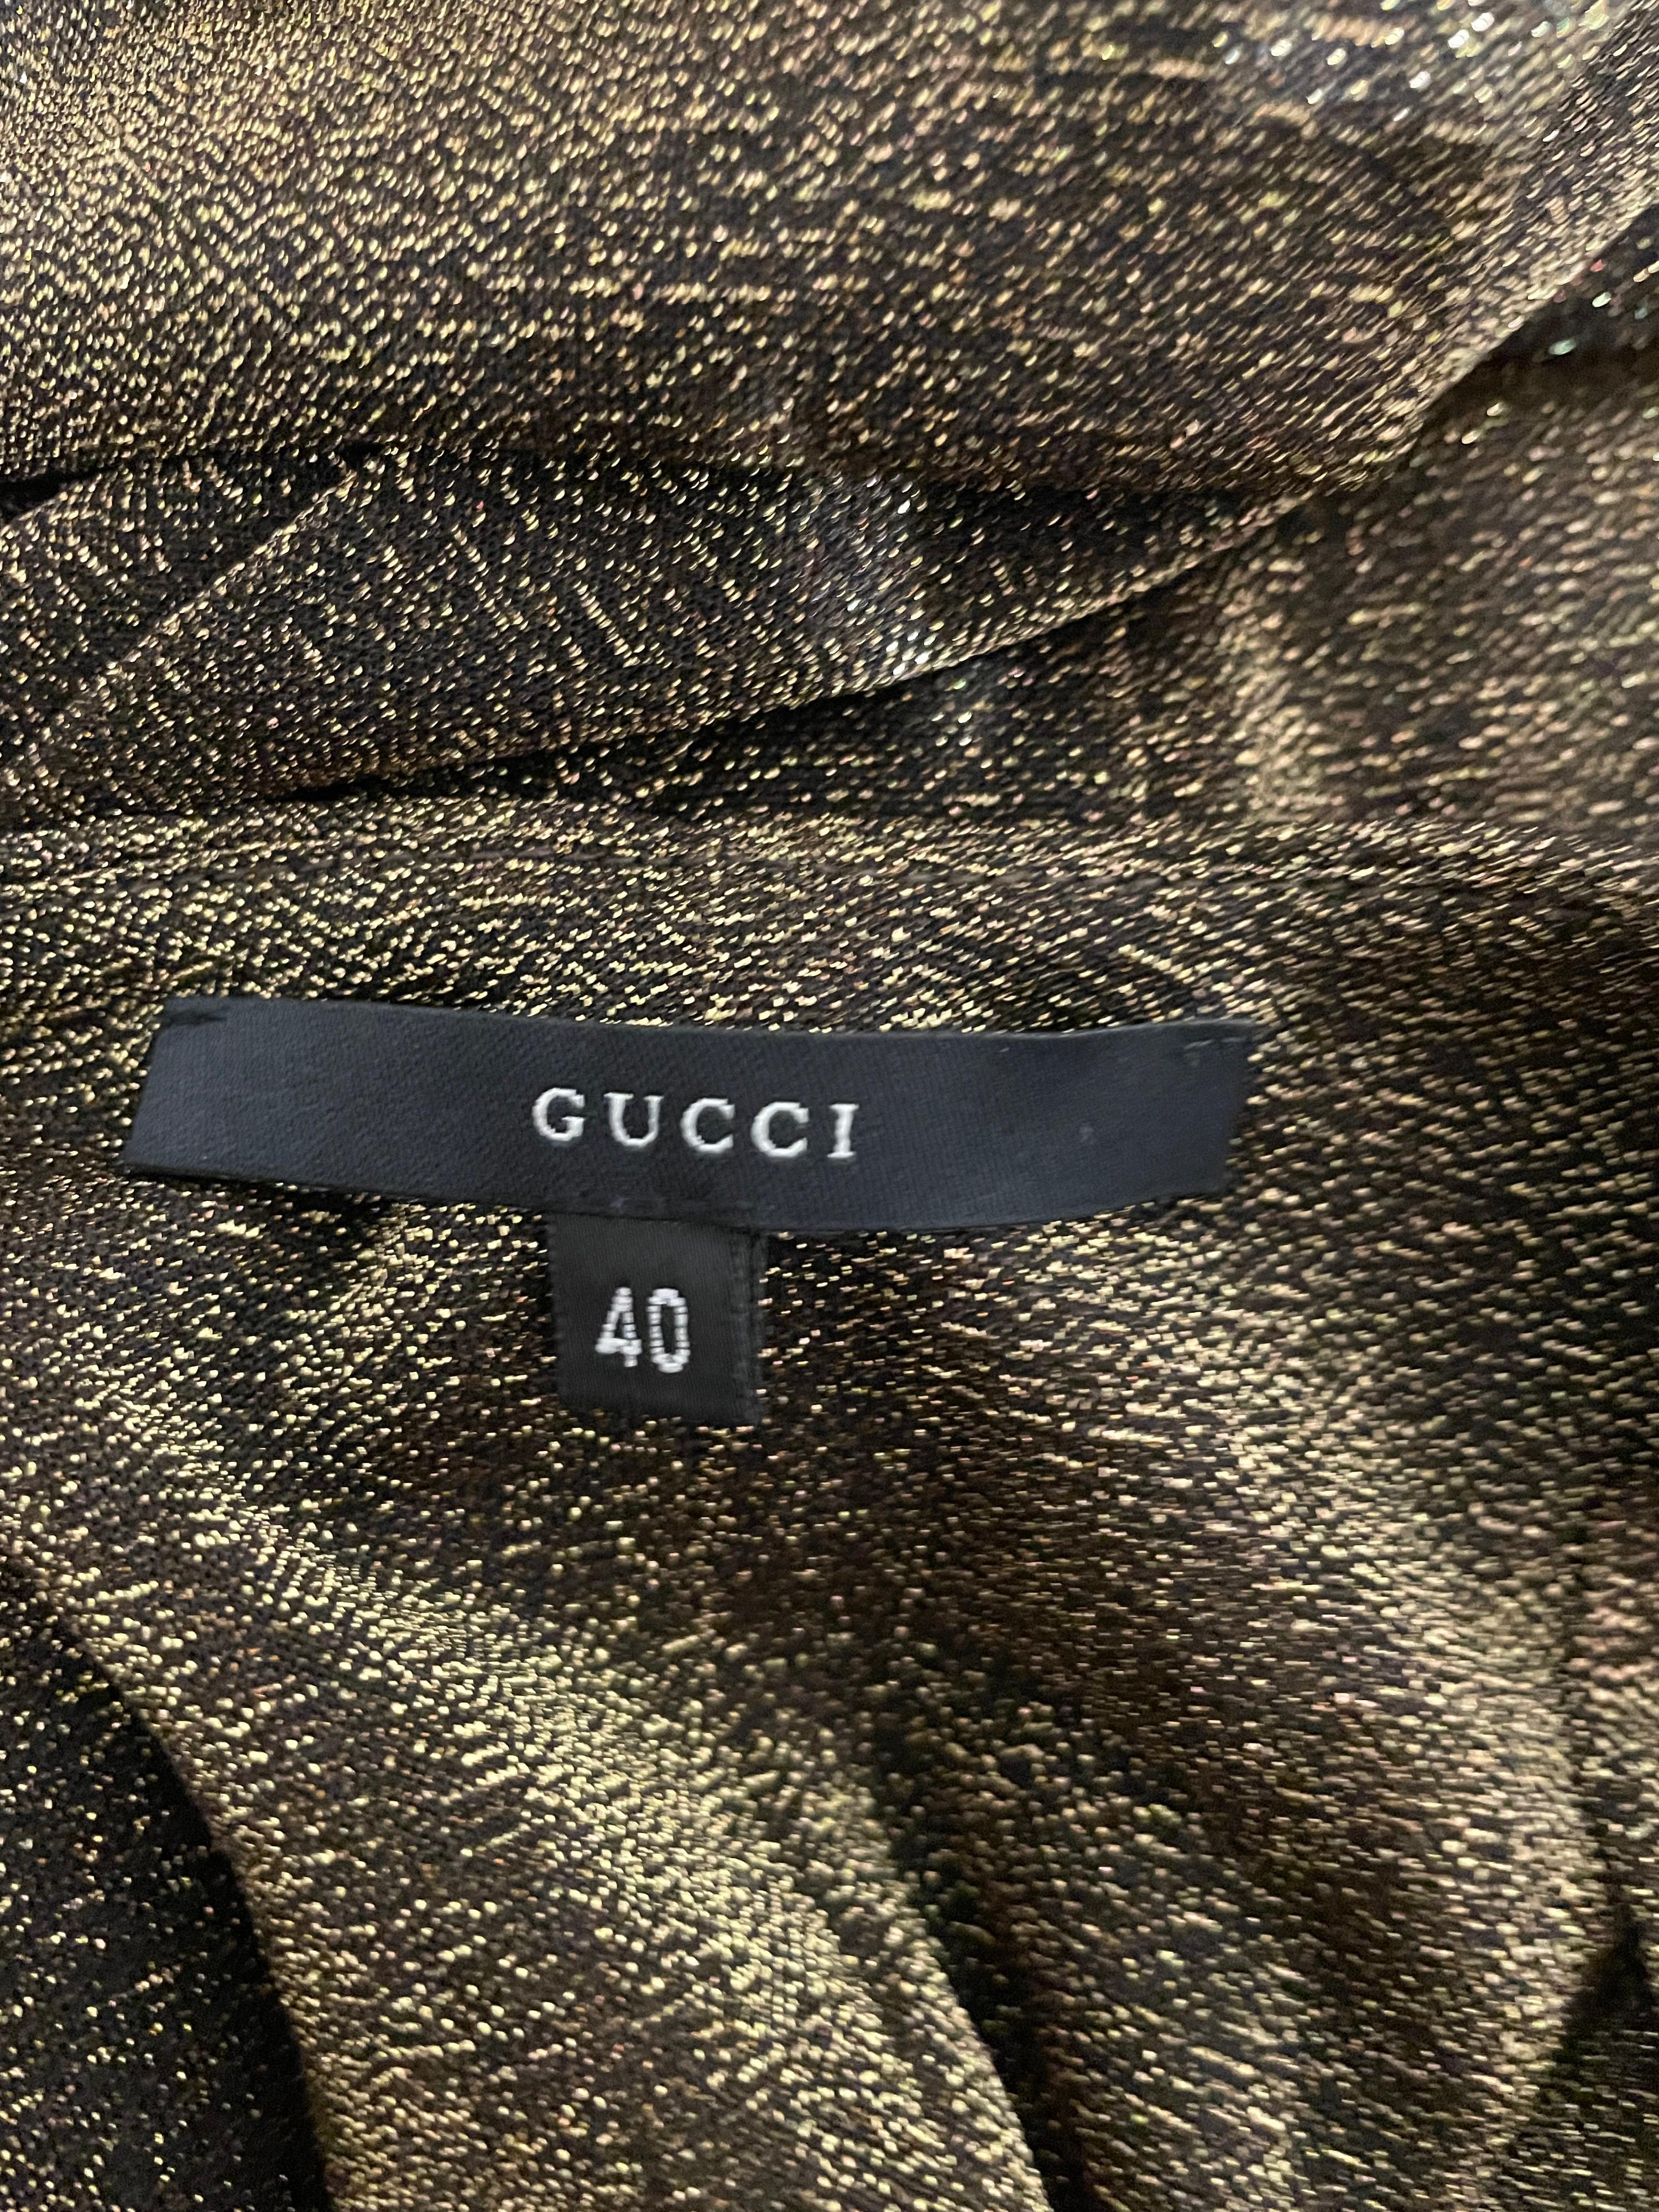 Gucci by Tom Ford Sheer Gold Dress with Dragon Ornament For Sale 1